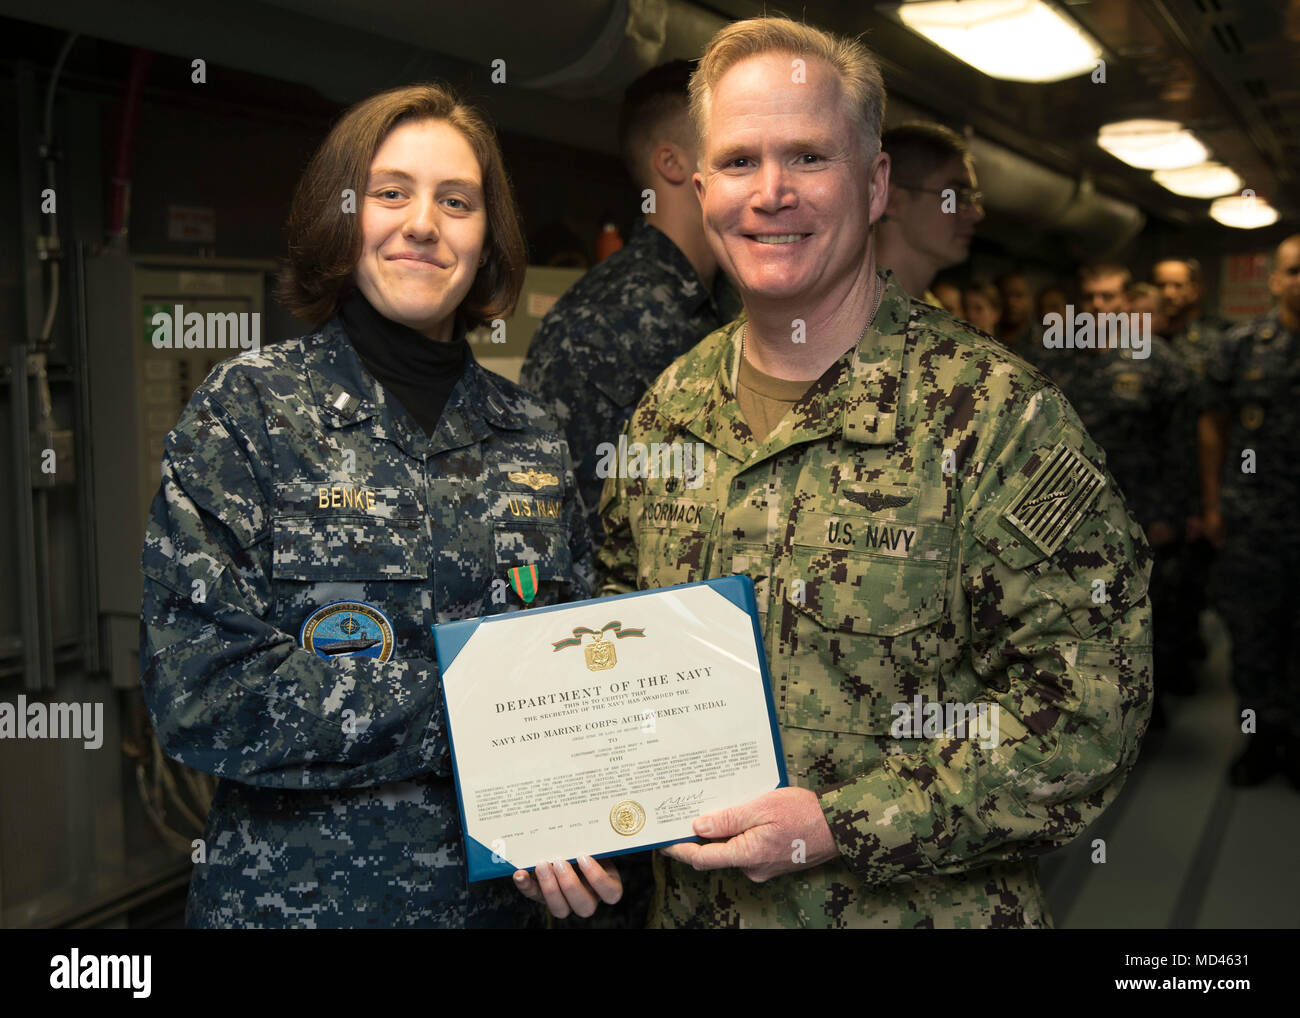 NORFOLK, Va. (Mar. 20, 2018) -- Lt. j.g. Mary Benke, assigned to USS Gerald R. Ford's (CVN 78) intelligence department, receives a Navy and Marine Corps Achievement Medal certificate from Capt. Richard McCormack, Ford's commanding officer. (U.S. Navy photo by Mass Communication Specialist 3rd Class Ryan Carter) Stock Photo